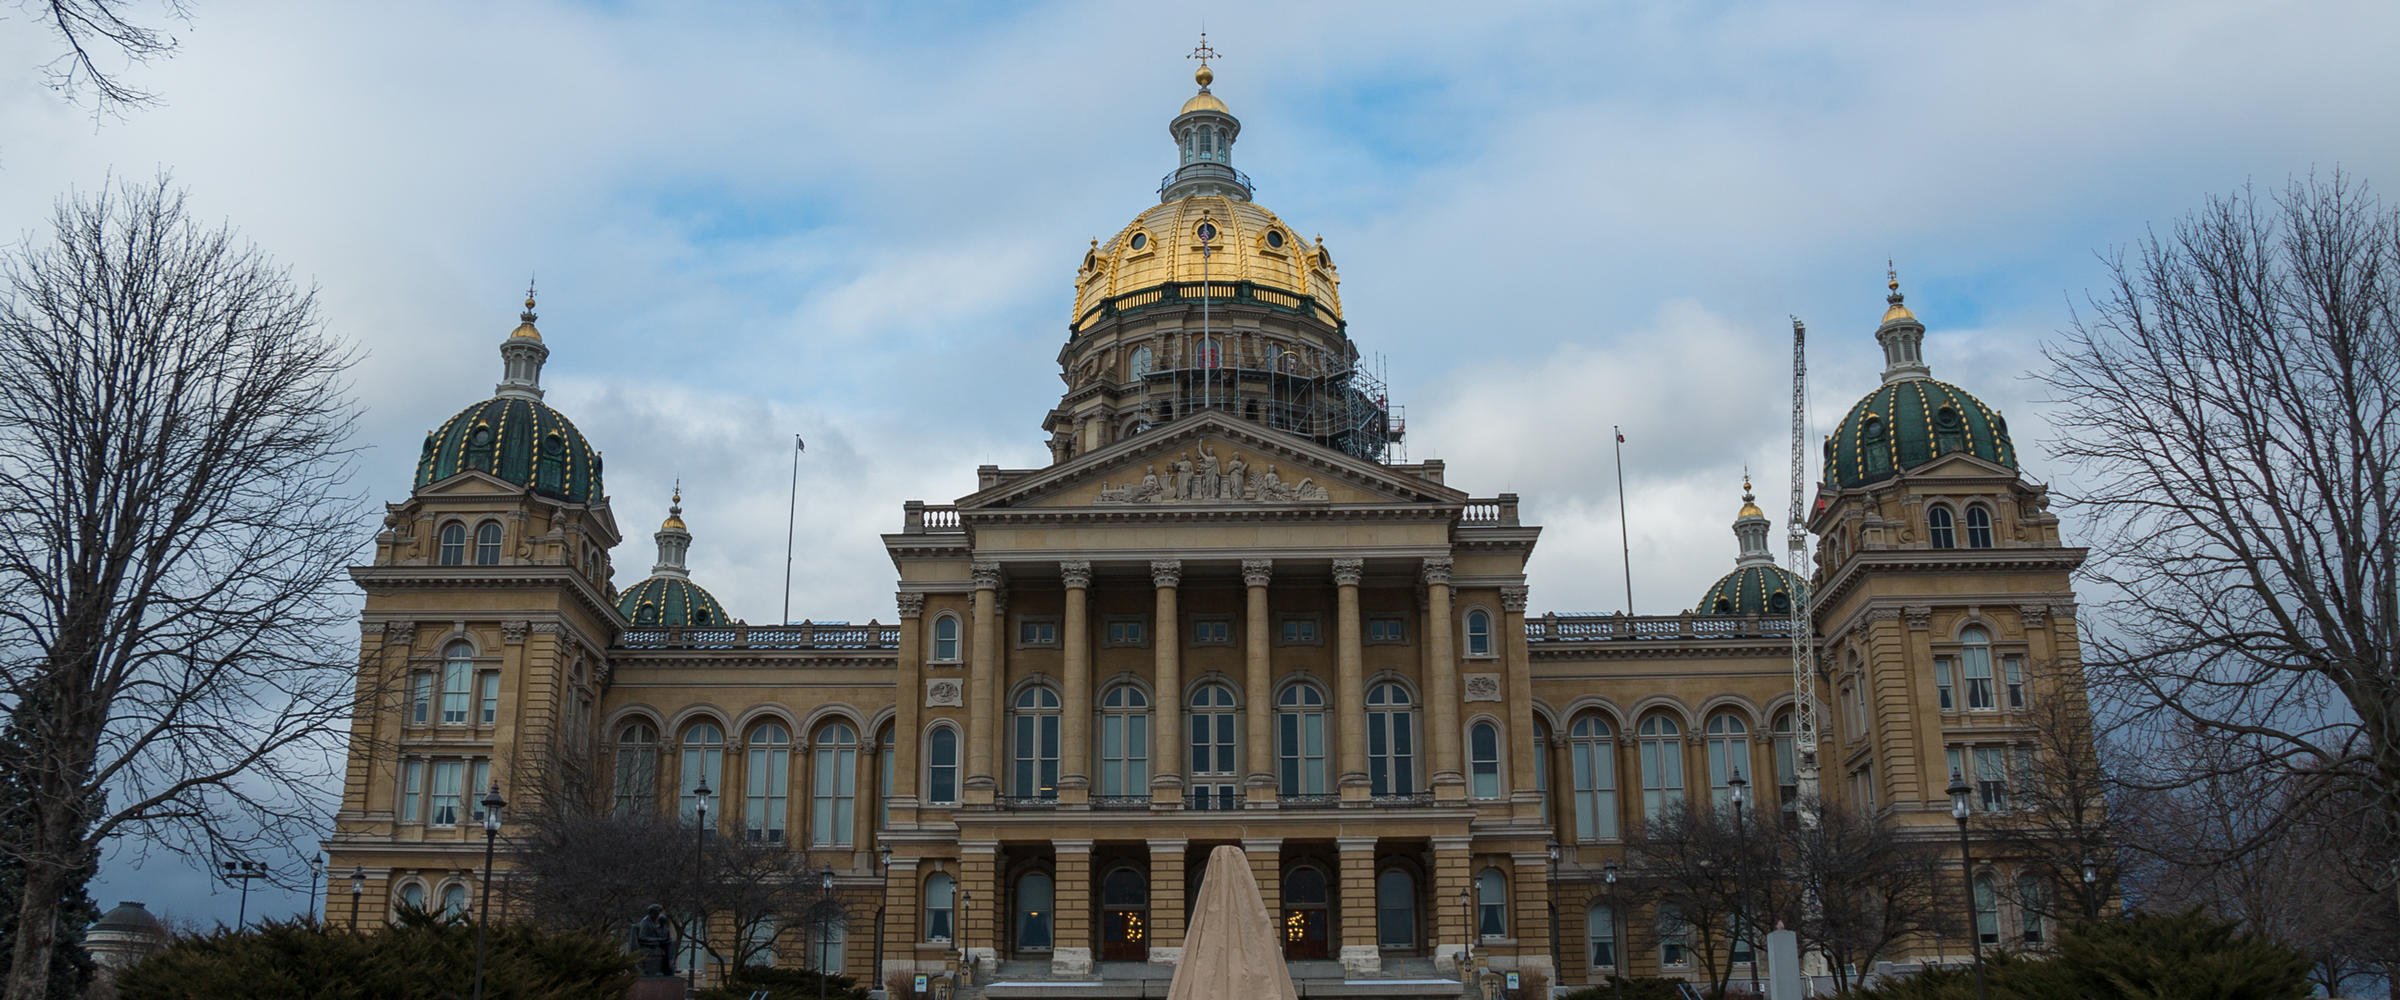 Under the Golden Dome: Insurance, Licenses & Energy 3/9/2018 | Iowa ...